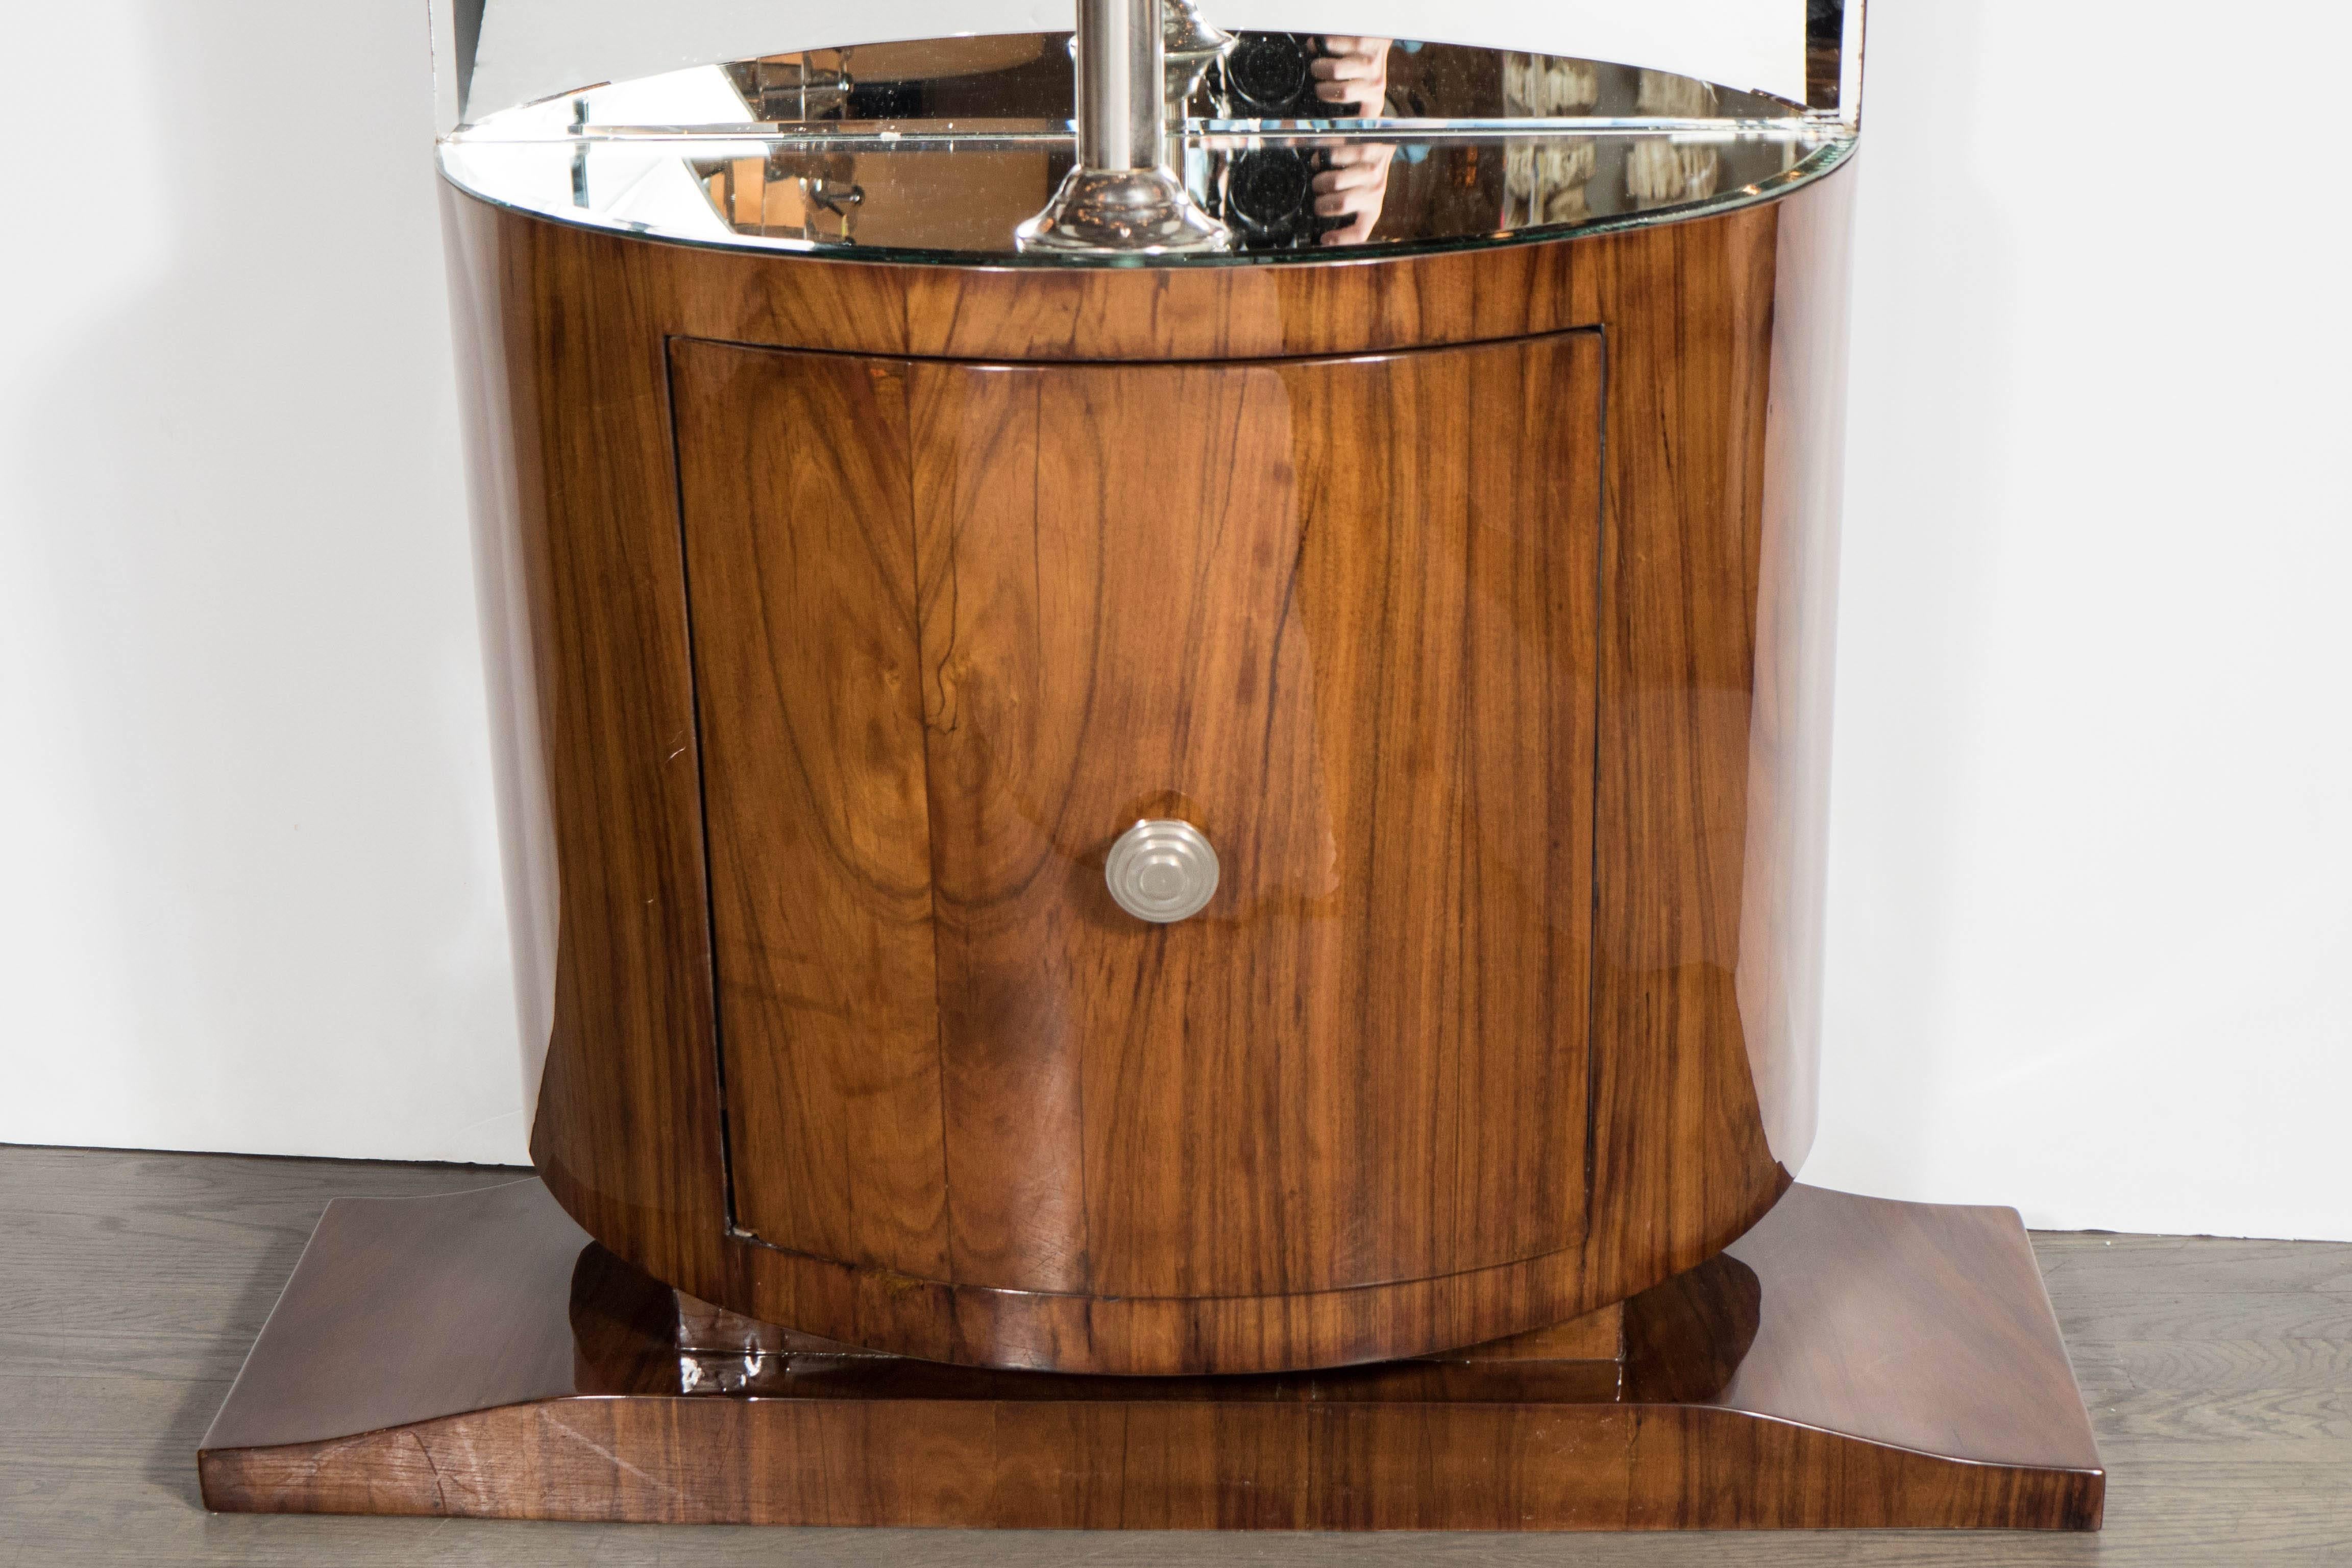 This exceptional streamlined Art Deco demilune bar in fine bookmatched walnut sits atop a tapered plinth base. It has a cabinet door with a single skyscraper style nickeled pull beneath a mirrored niche with a nickeled vertical support for